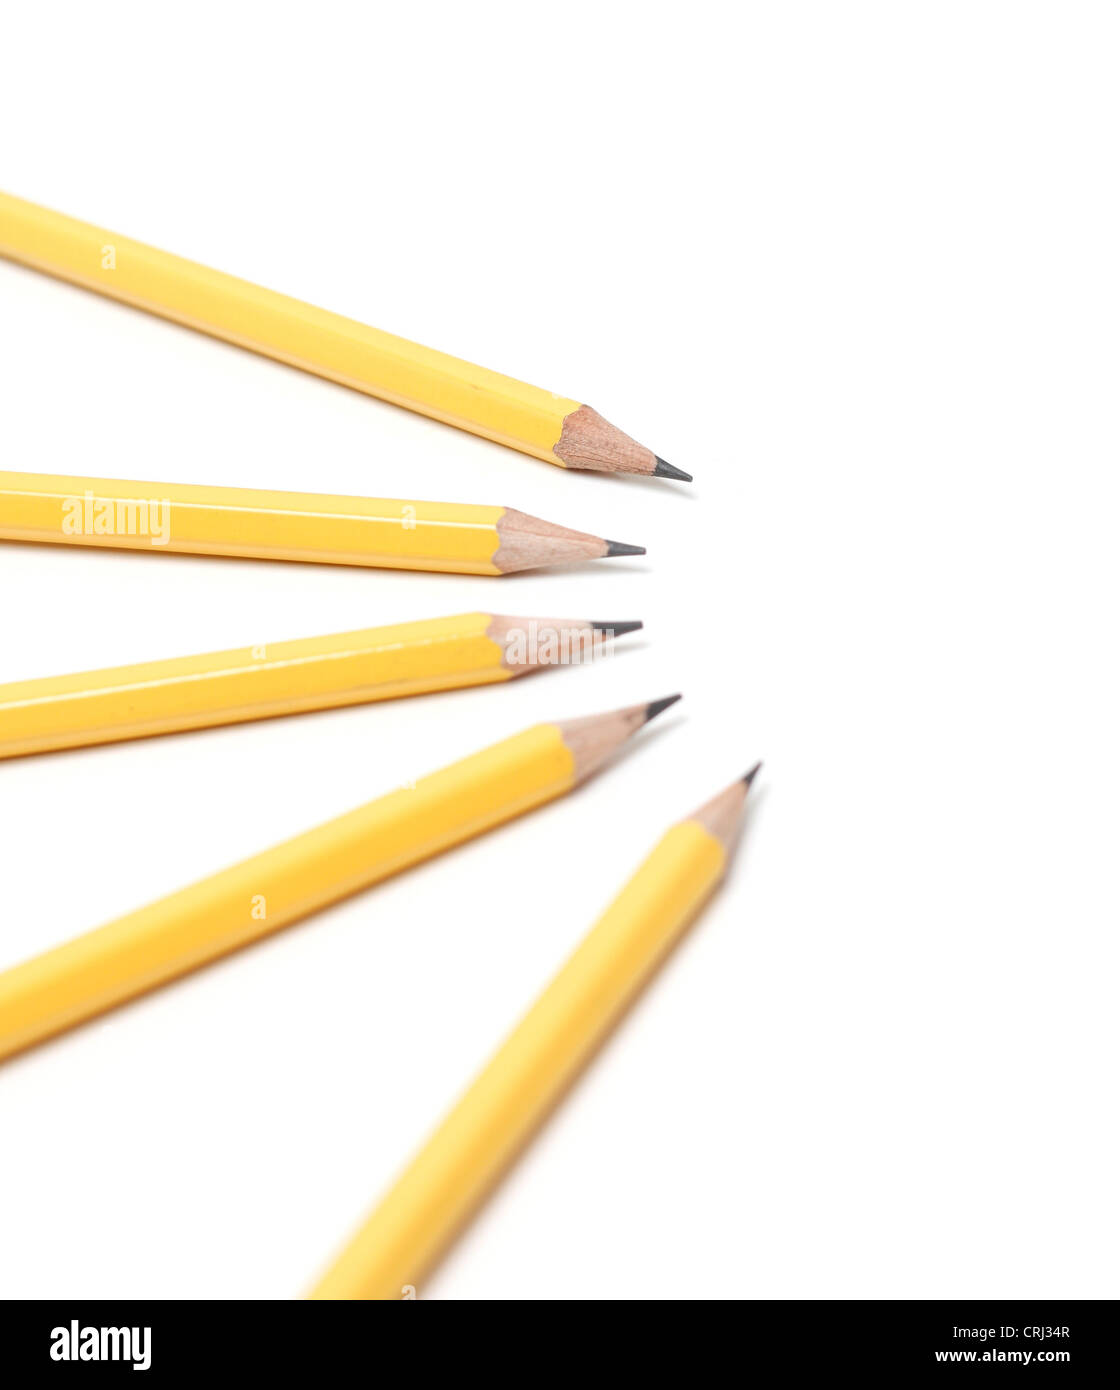 Pencils isolated on a white background Banque D'Images